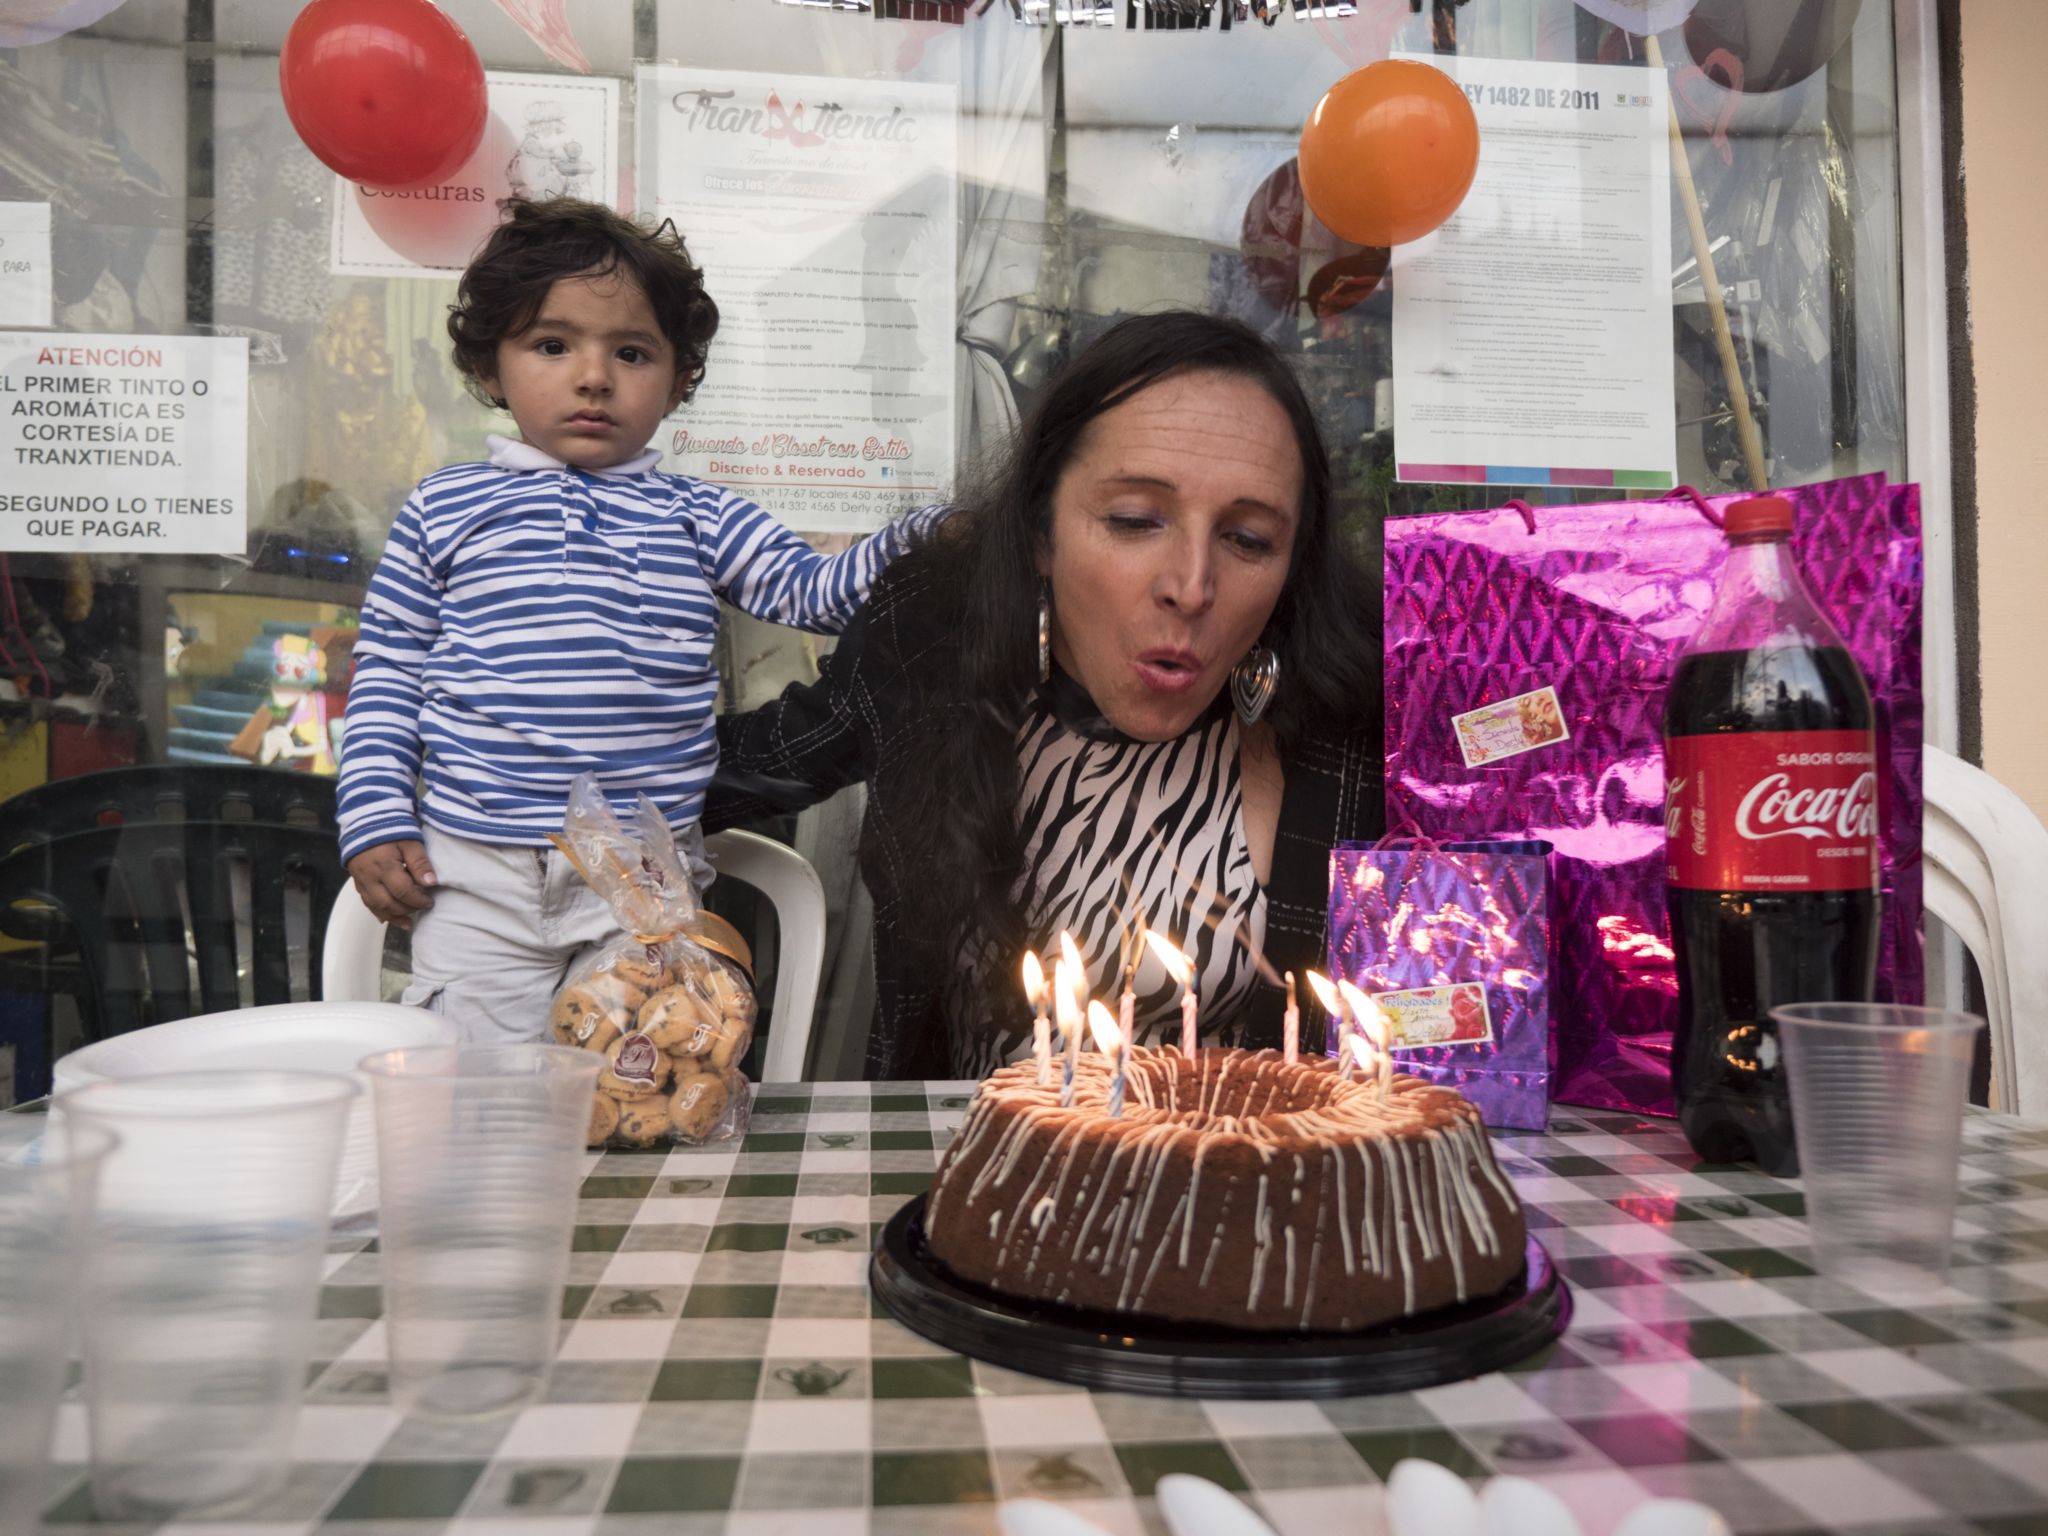 Derly Linares celebrating her birthday with her son